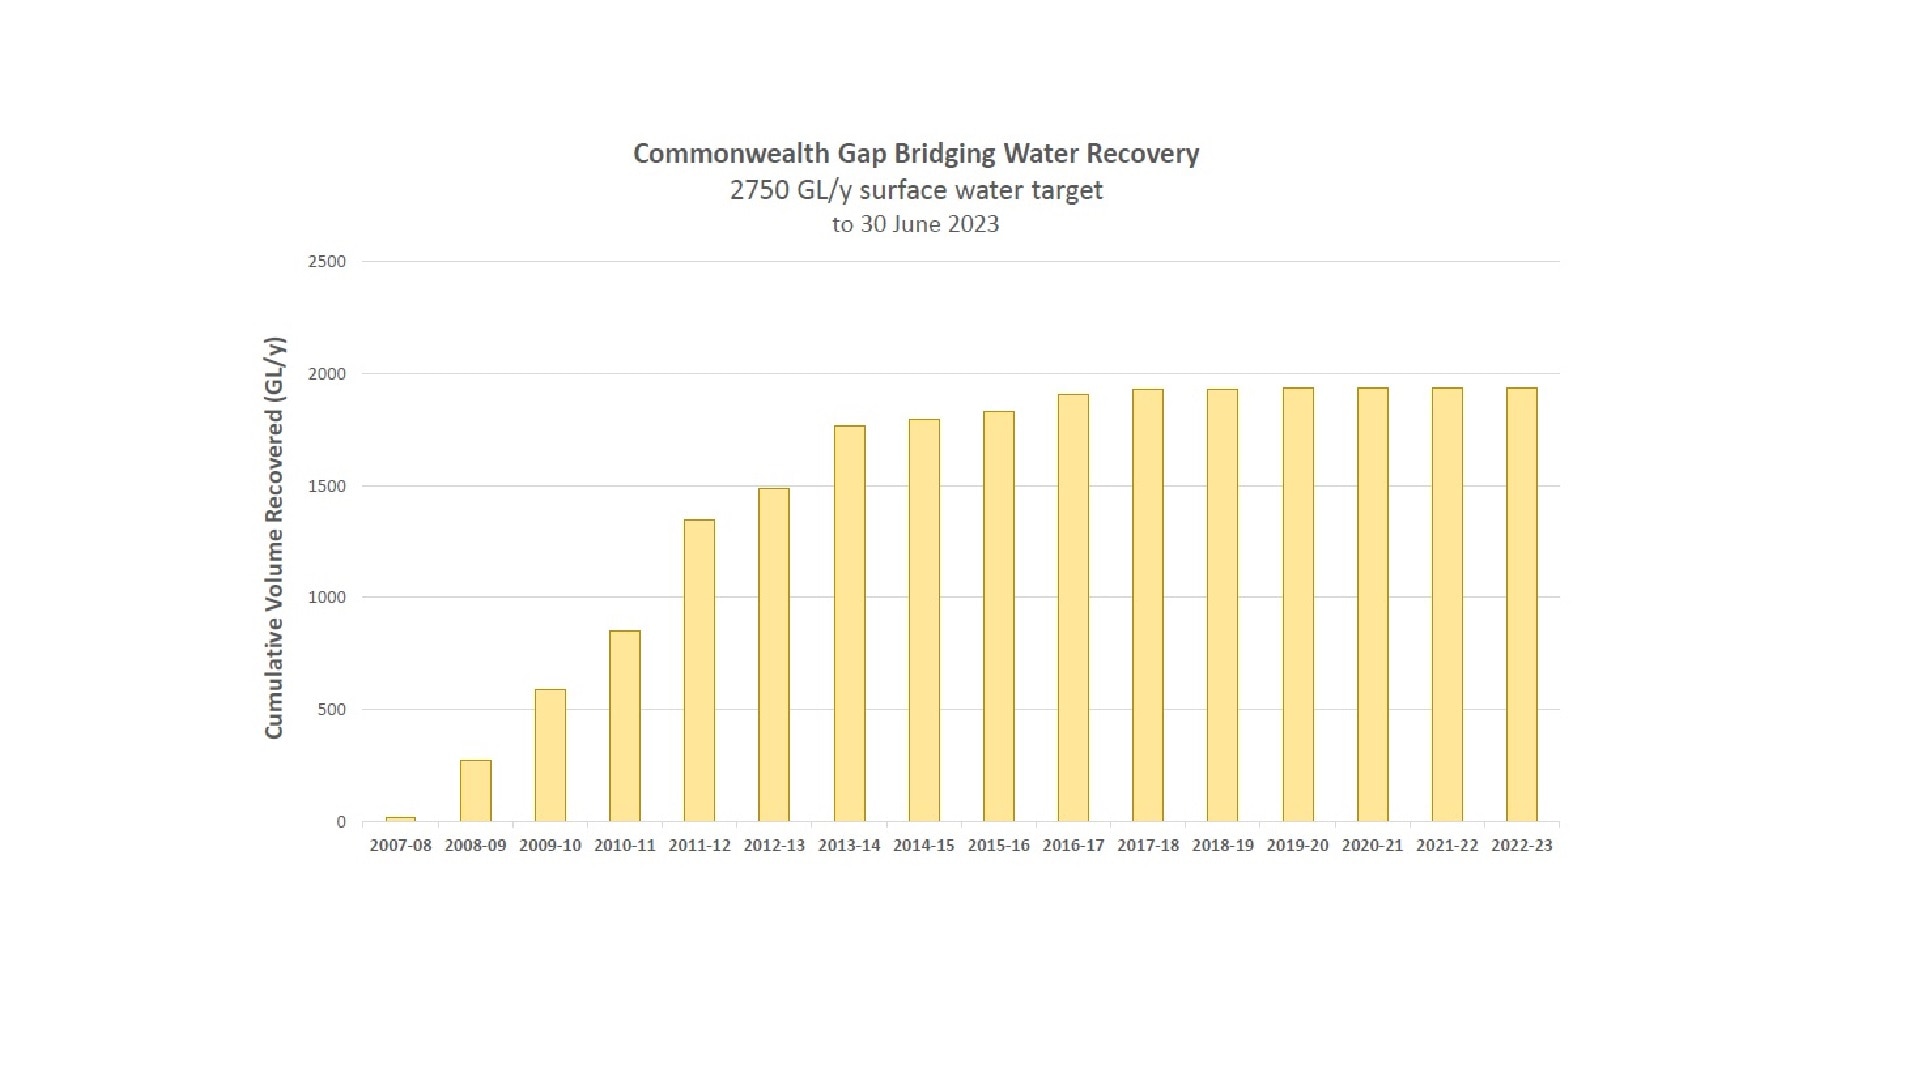 A graph displaying the commonwealth gap bridging water recovery